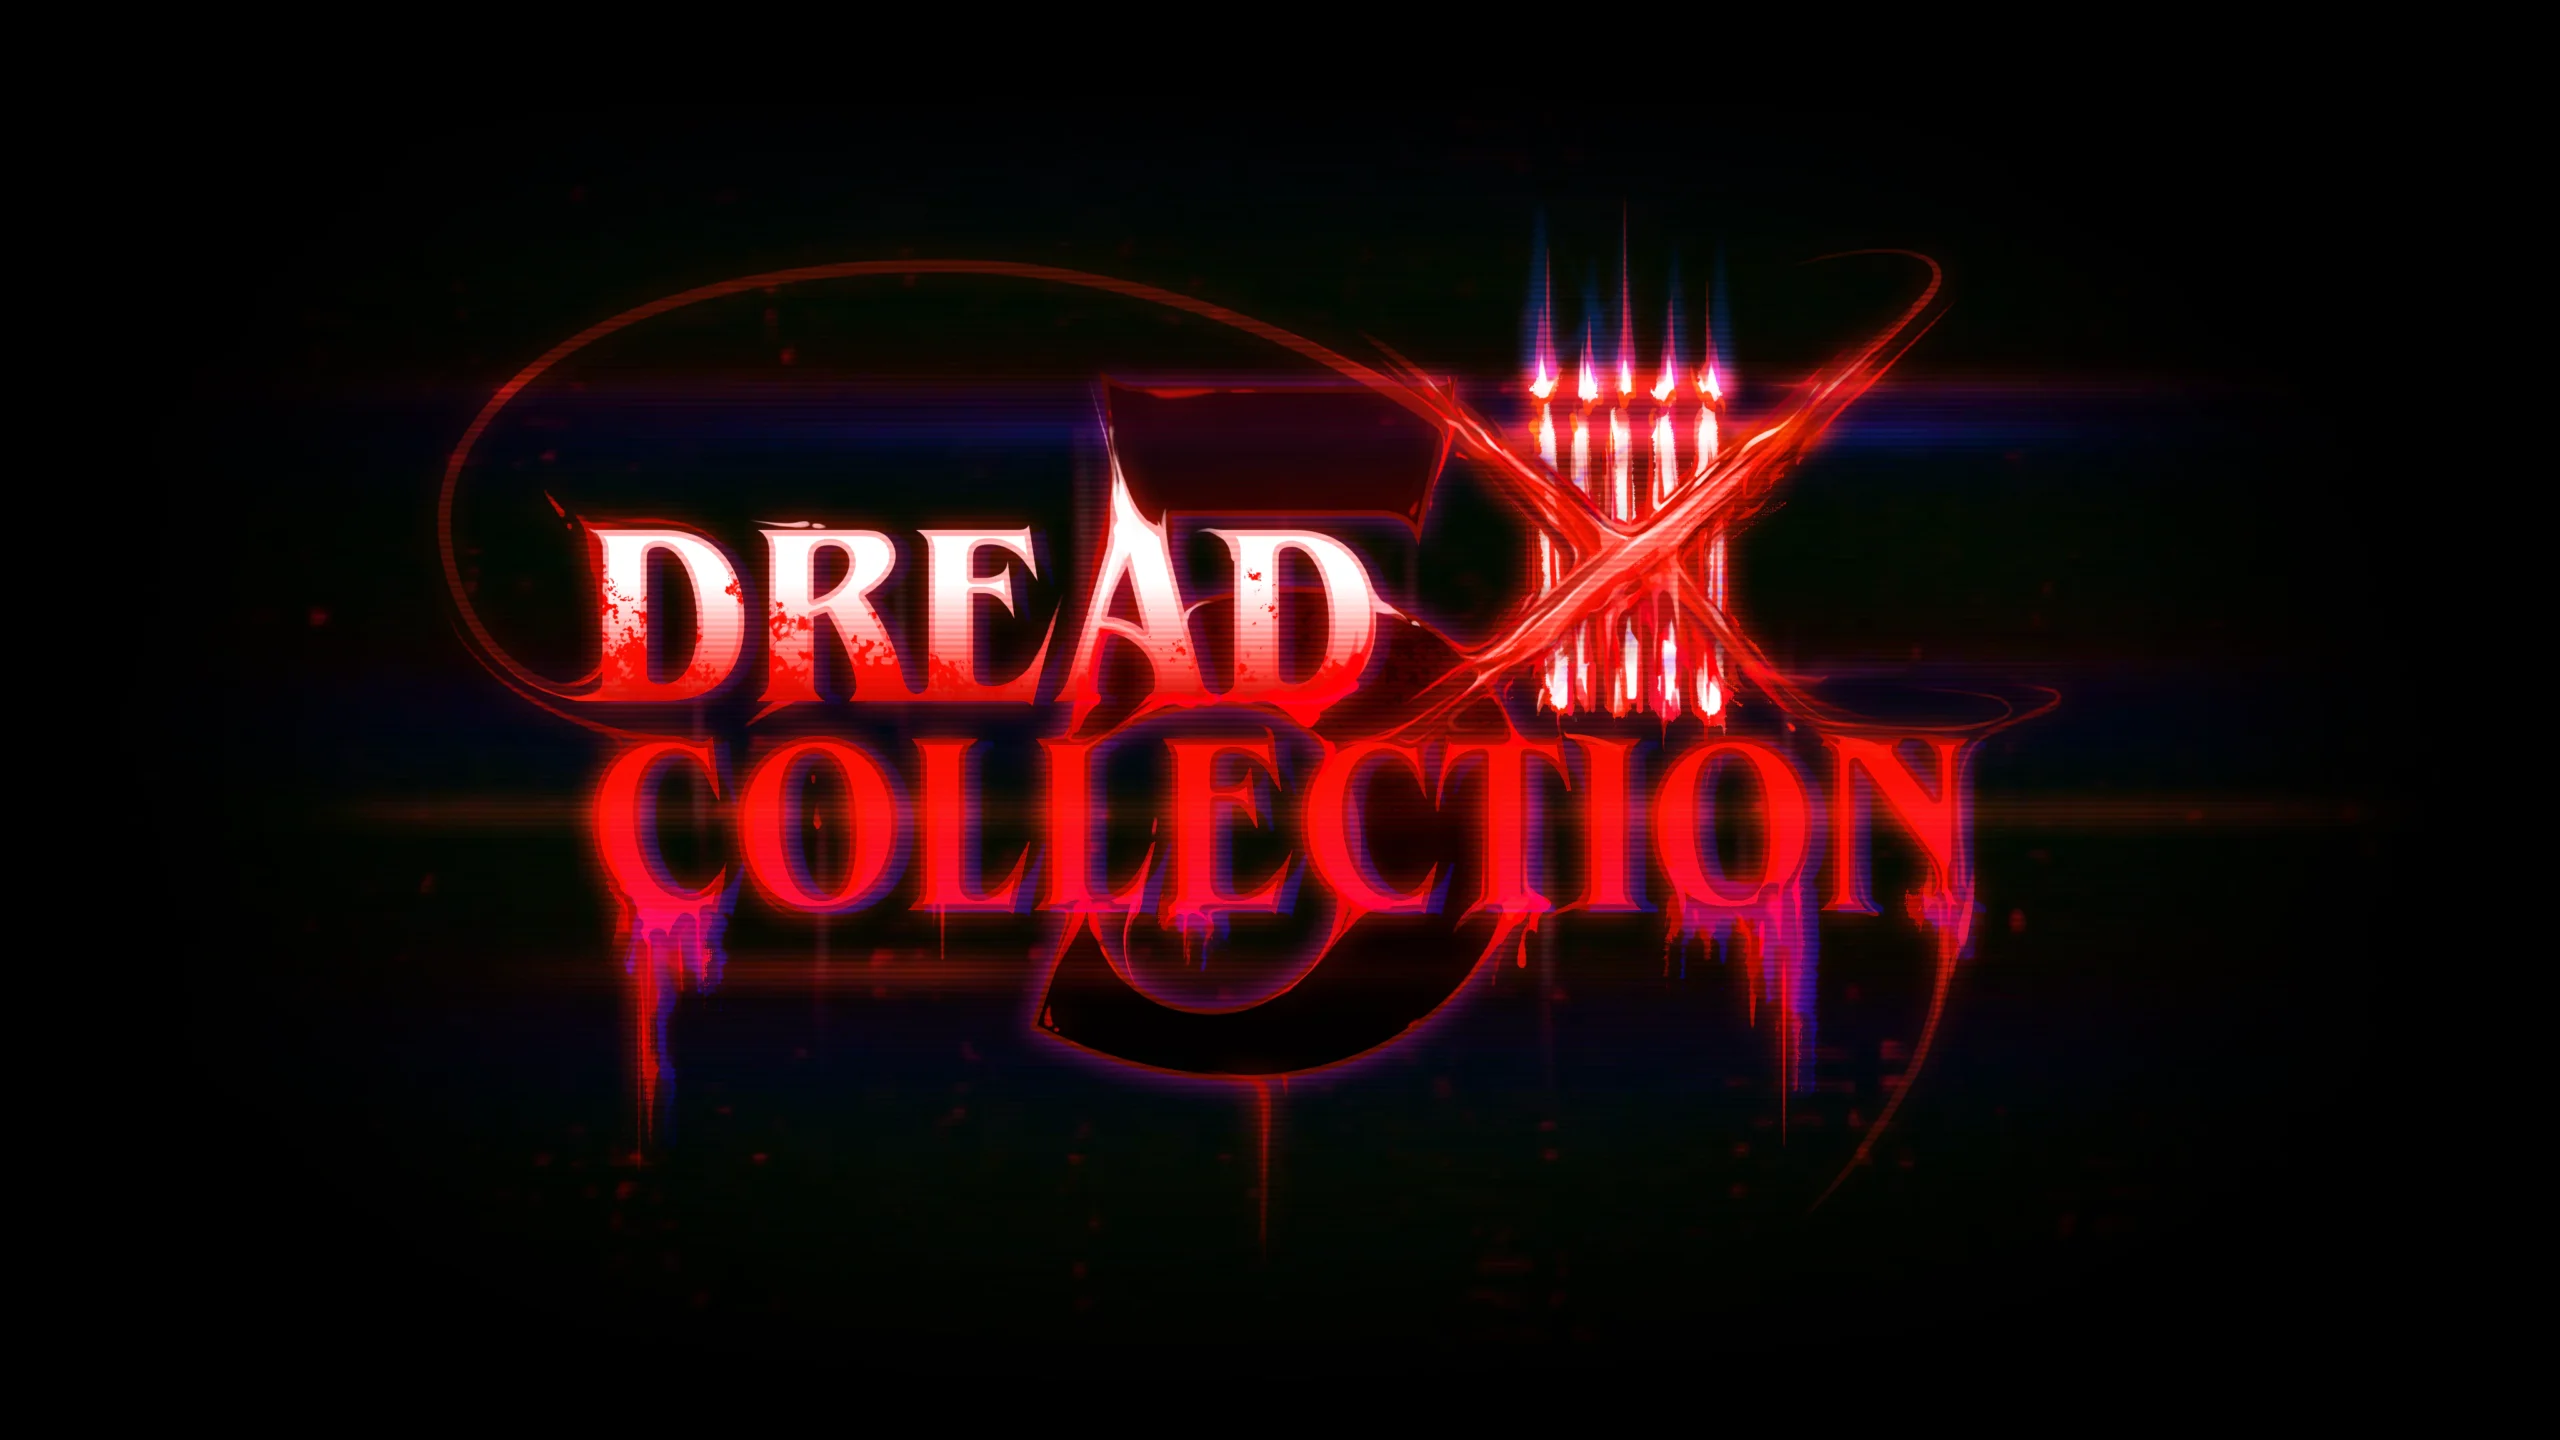 Dread X collection 5 News Indie game Fans News